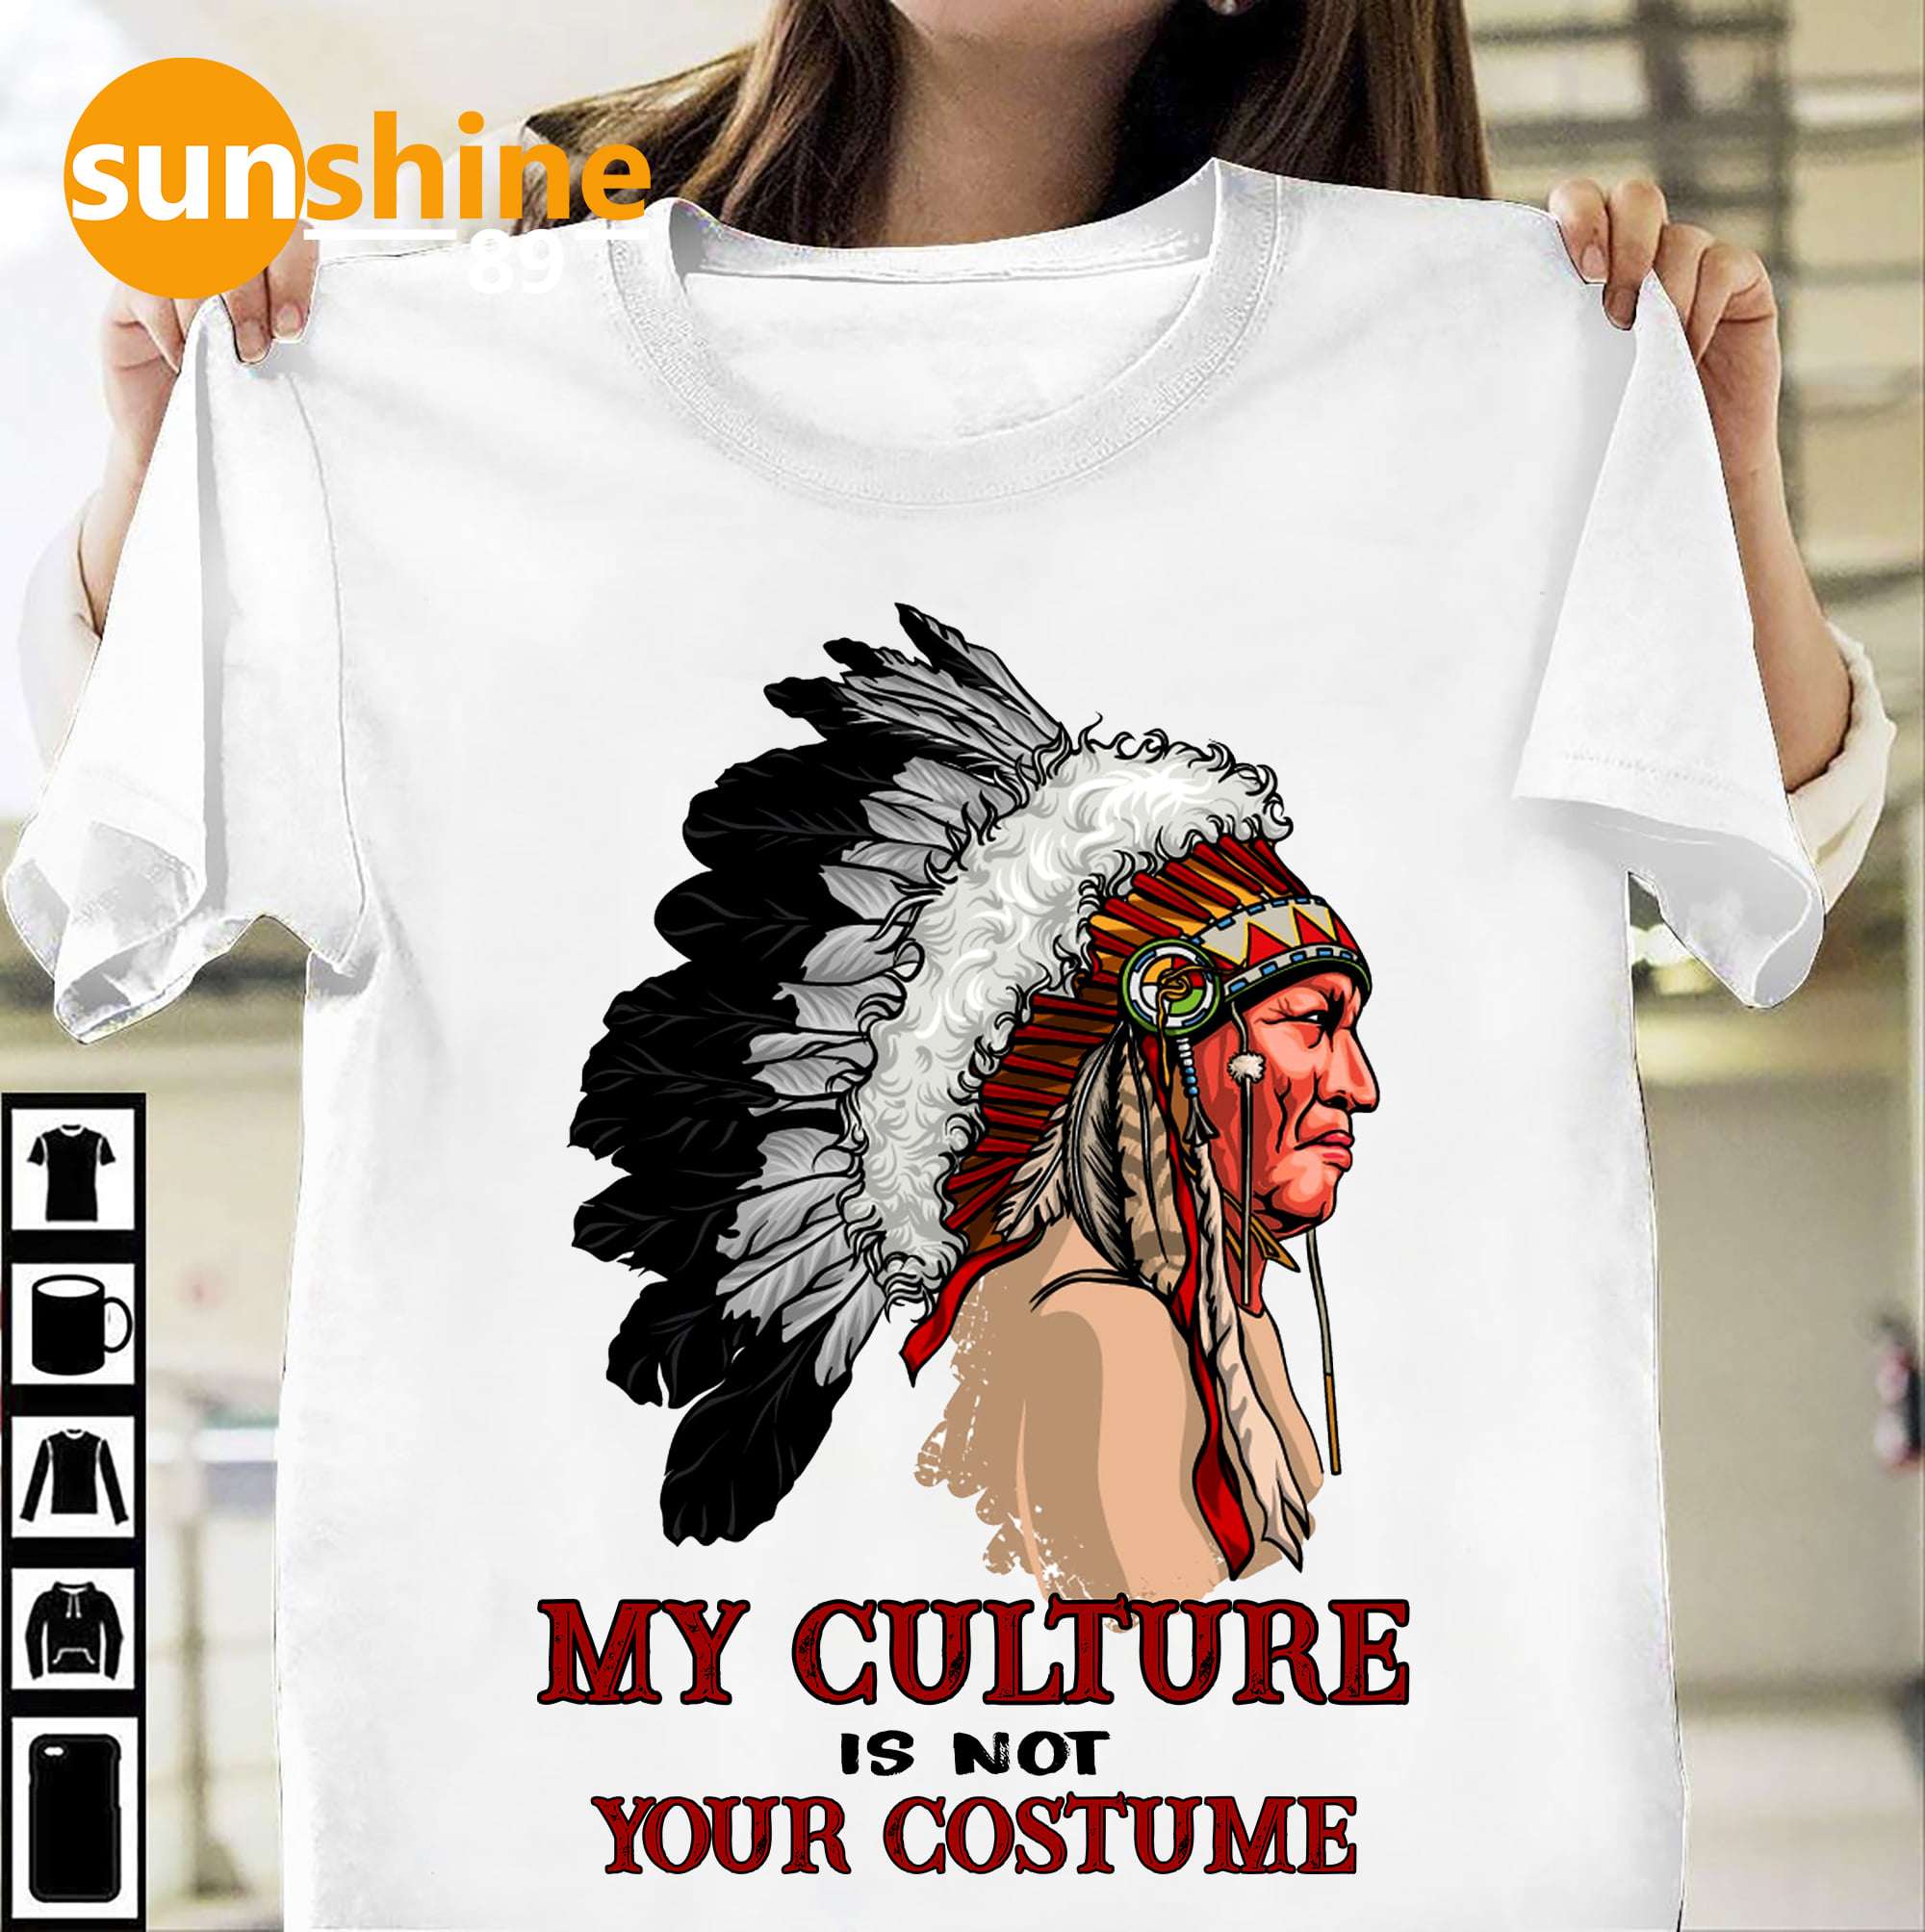 My culture is not your costume - Native American, Native American Culture Shirt, Hoodie, Sweatshirt - FridayStuff